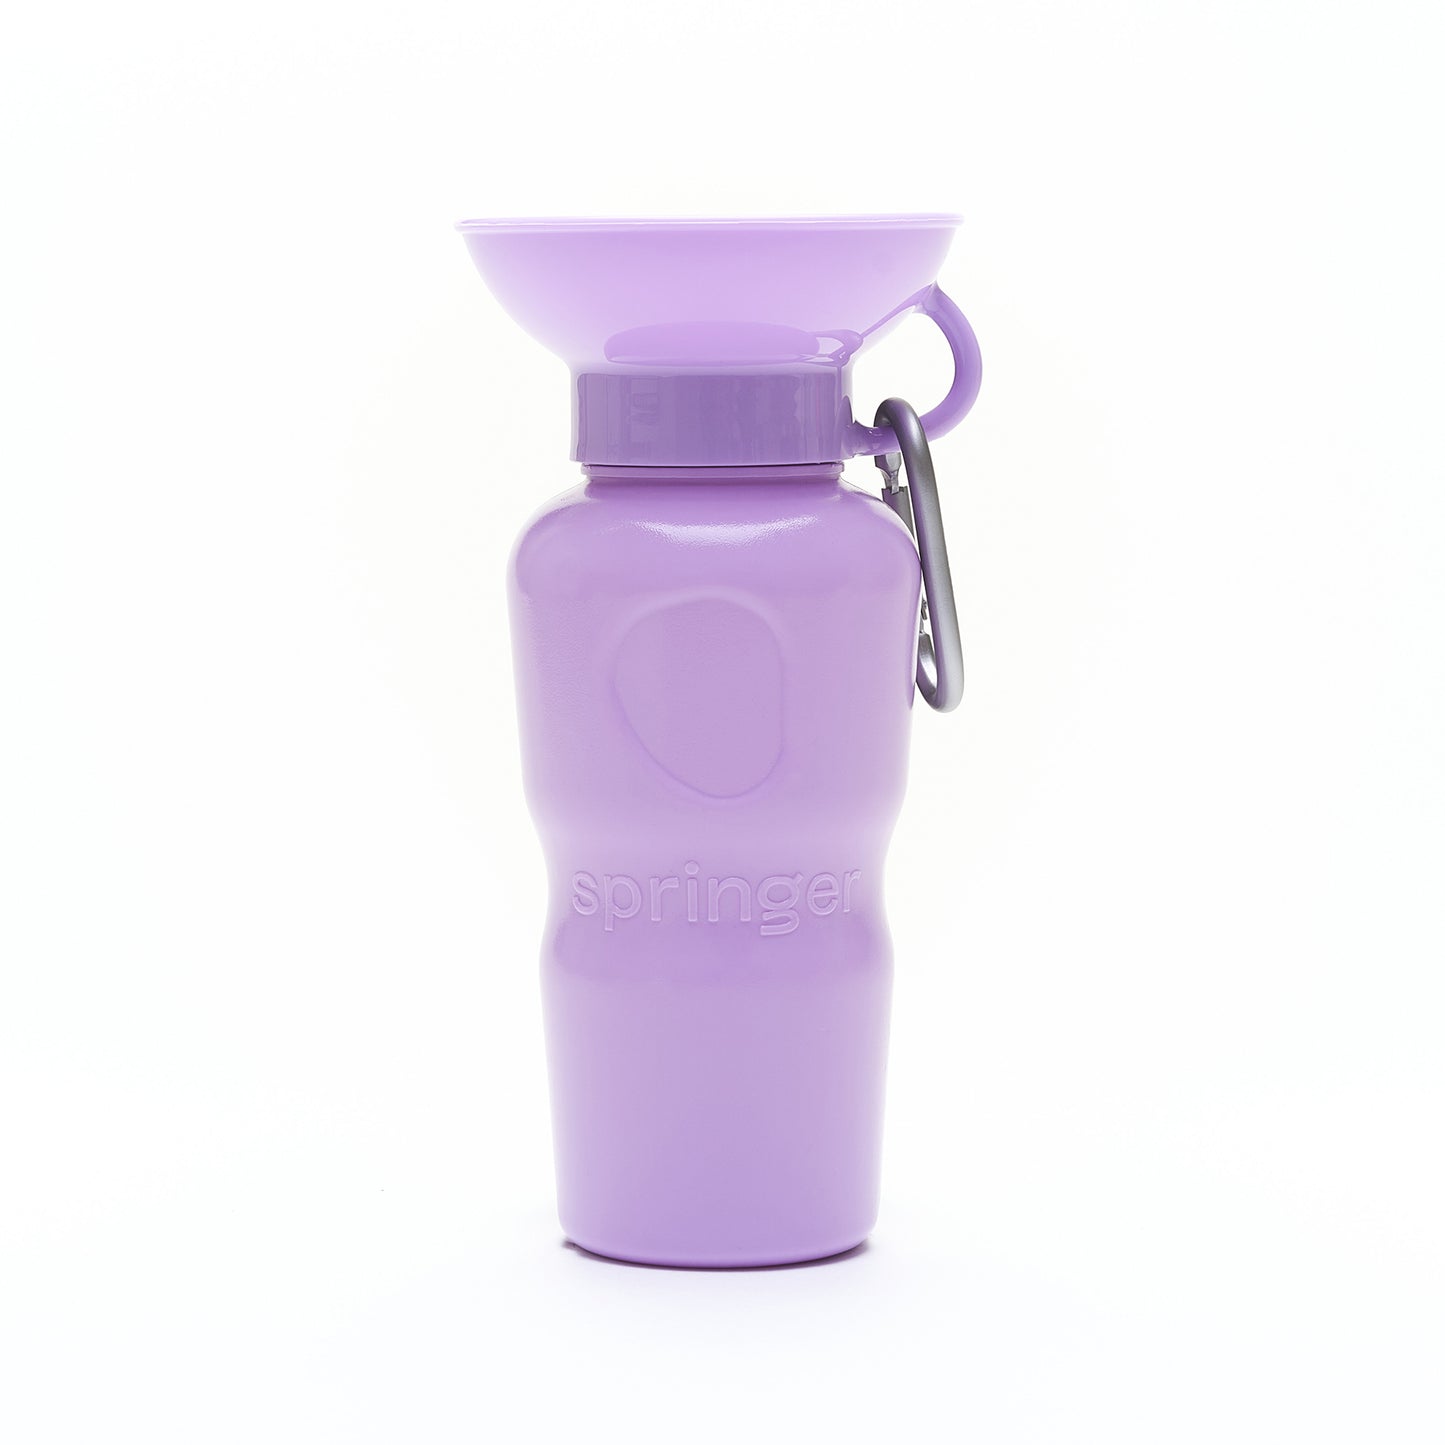 Classic Dog Water Travel Bottle (Case of 12)